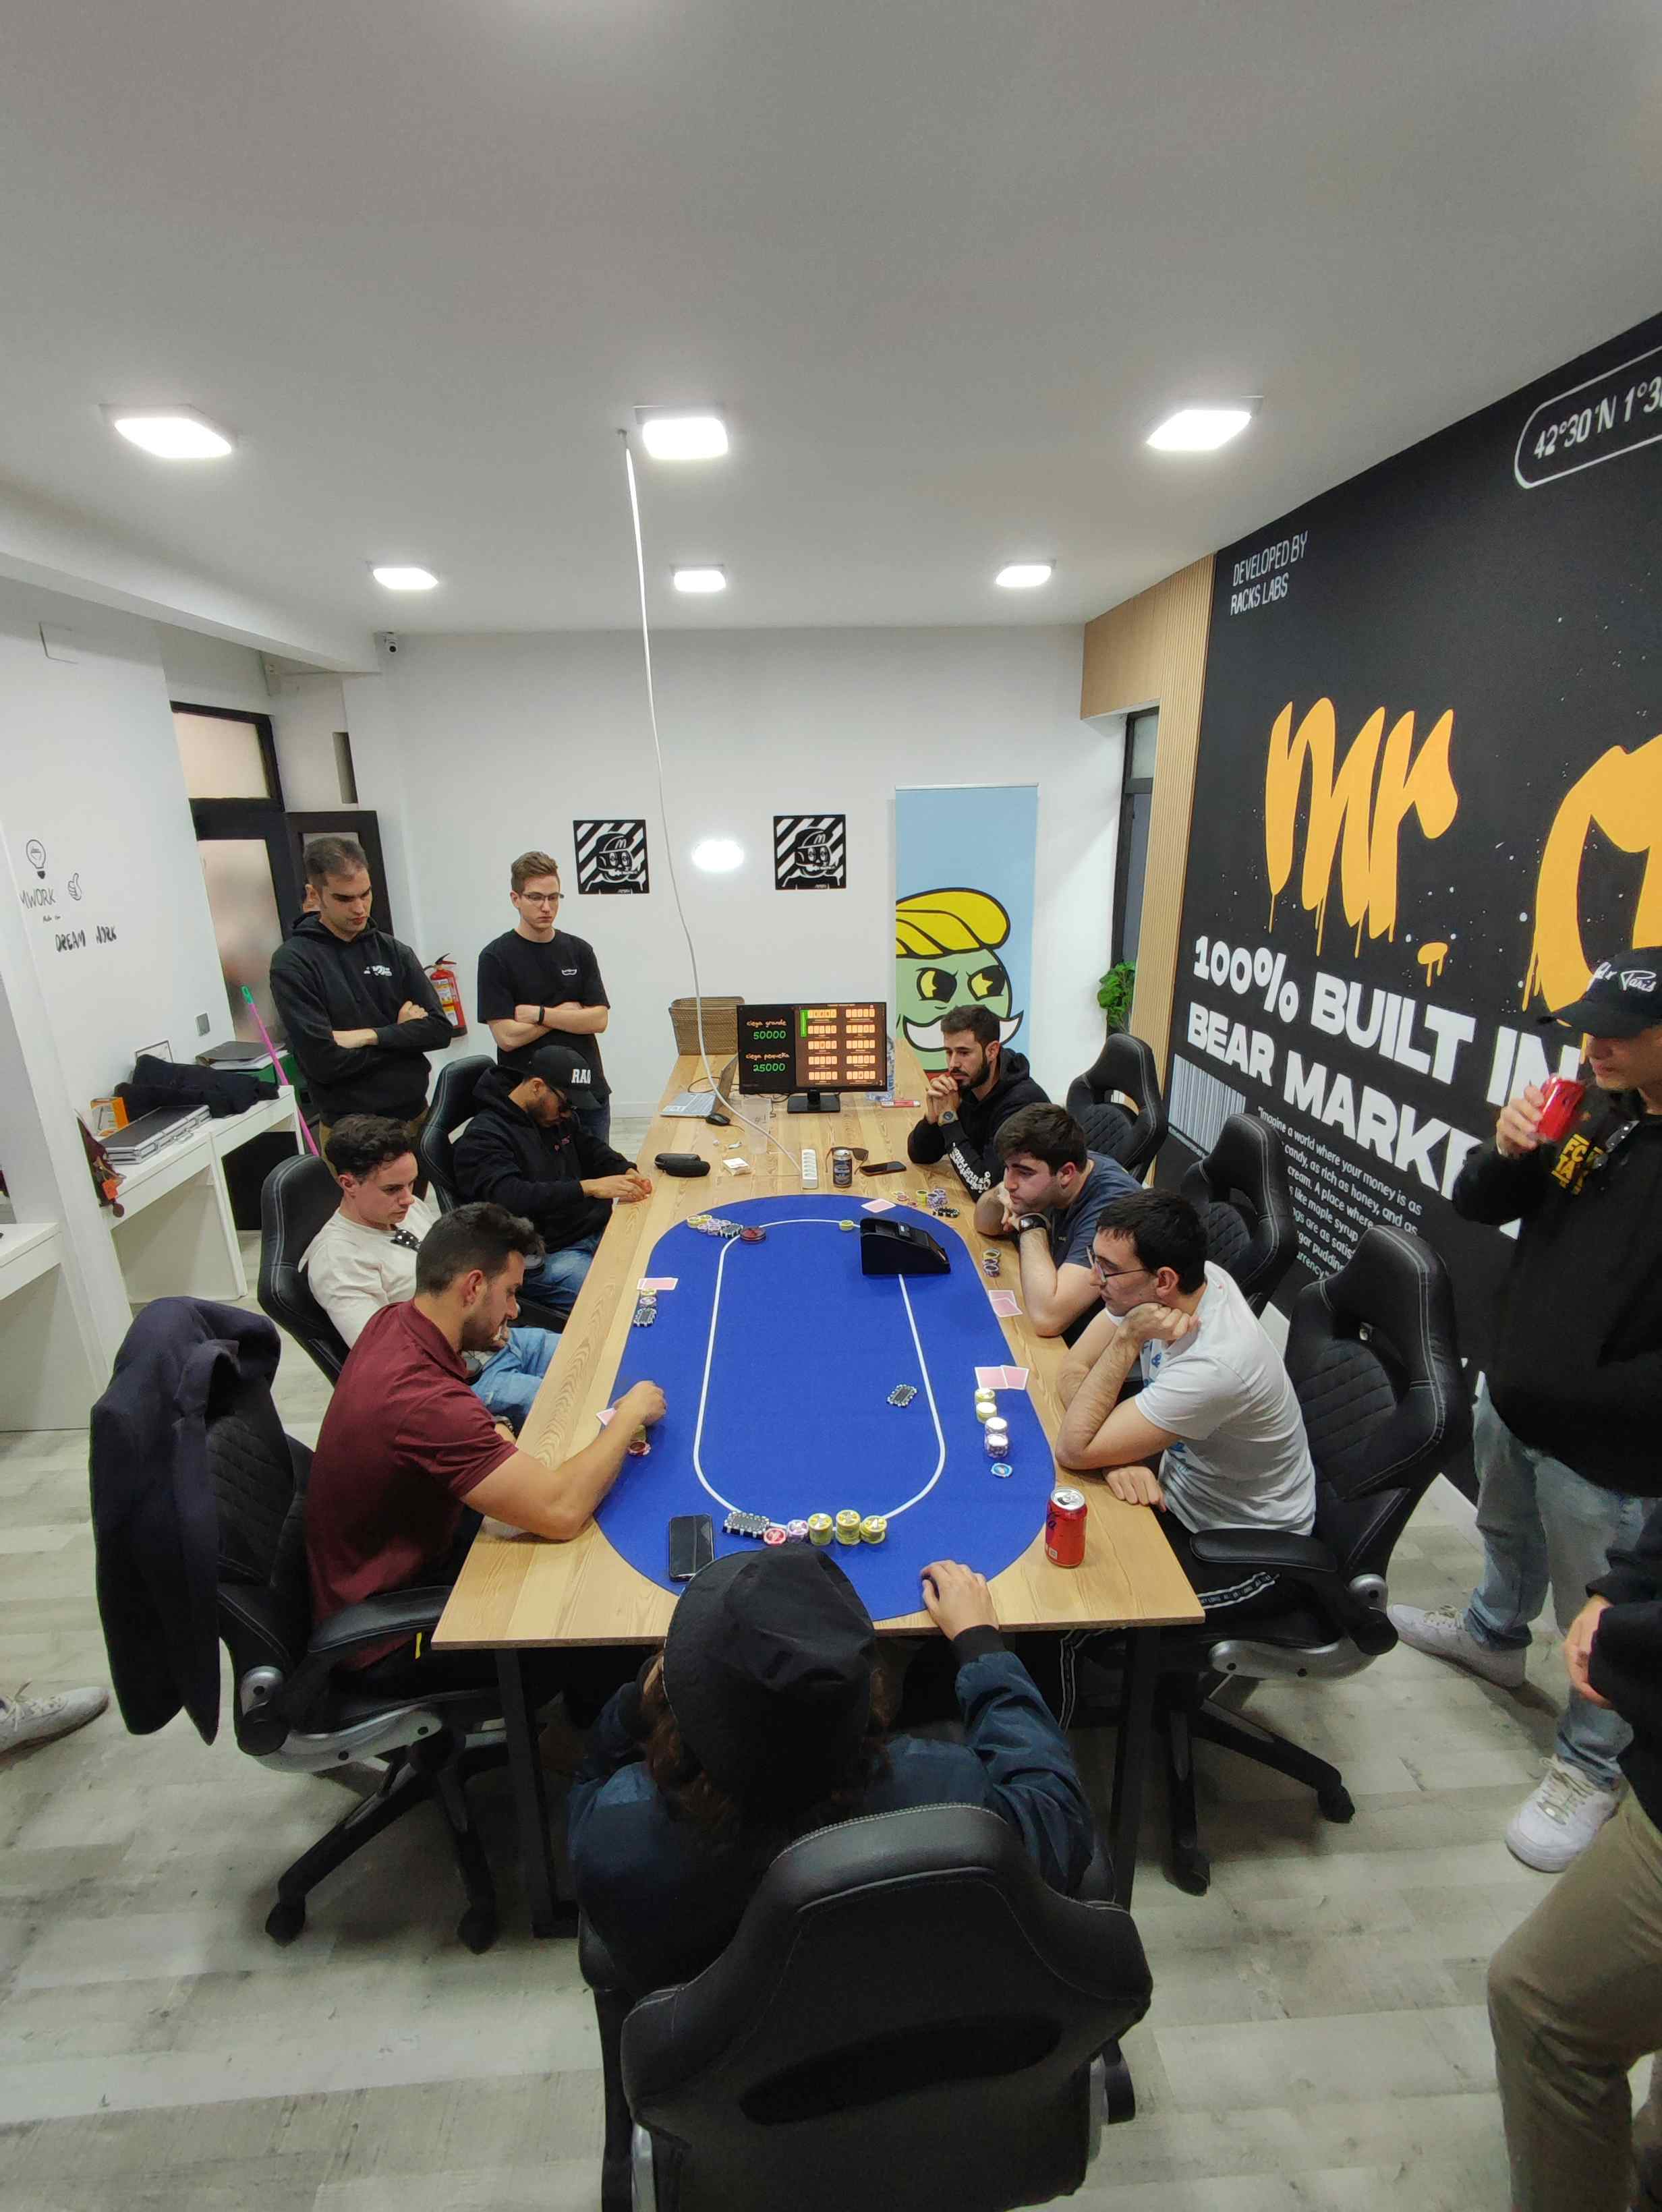 Image from Poker Madrid event